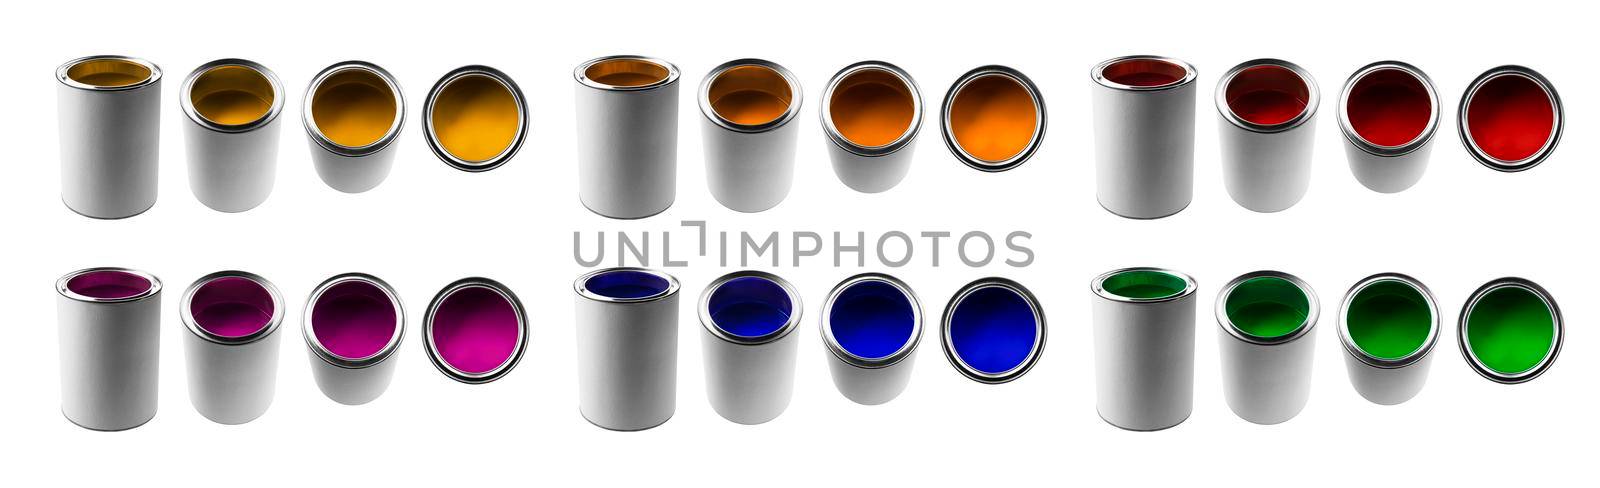 Cans with different colors of paints in different angles on a white background.